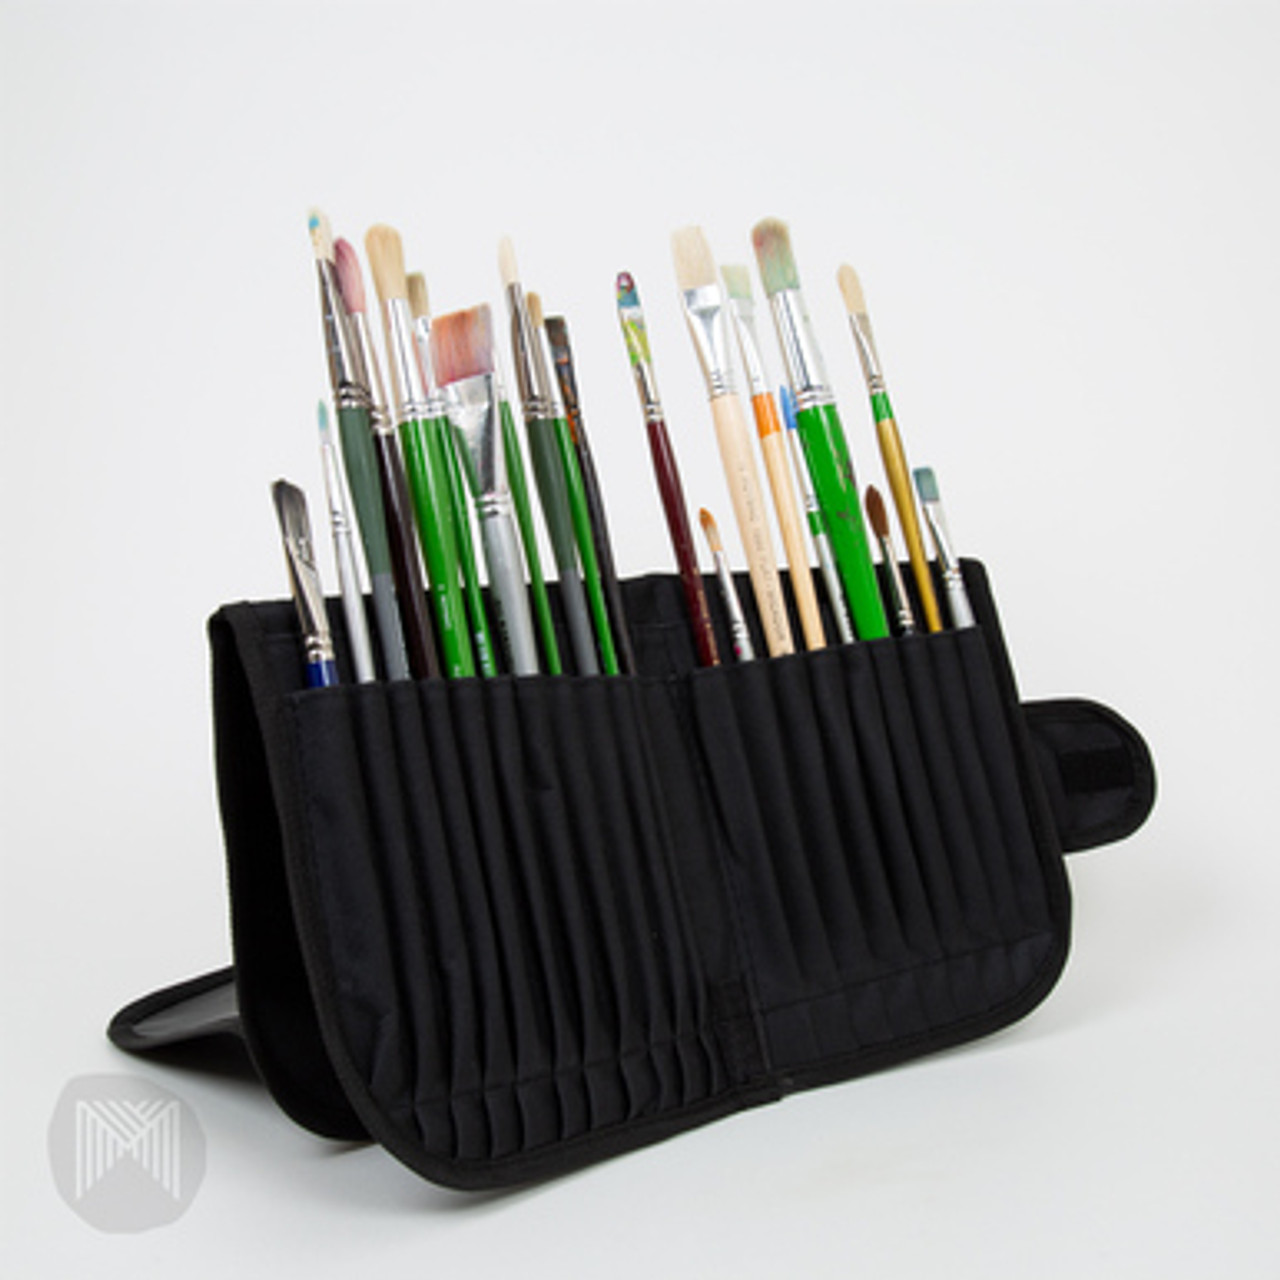 Roymac-Brush carry and display case